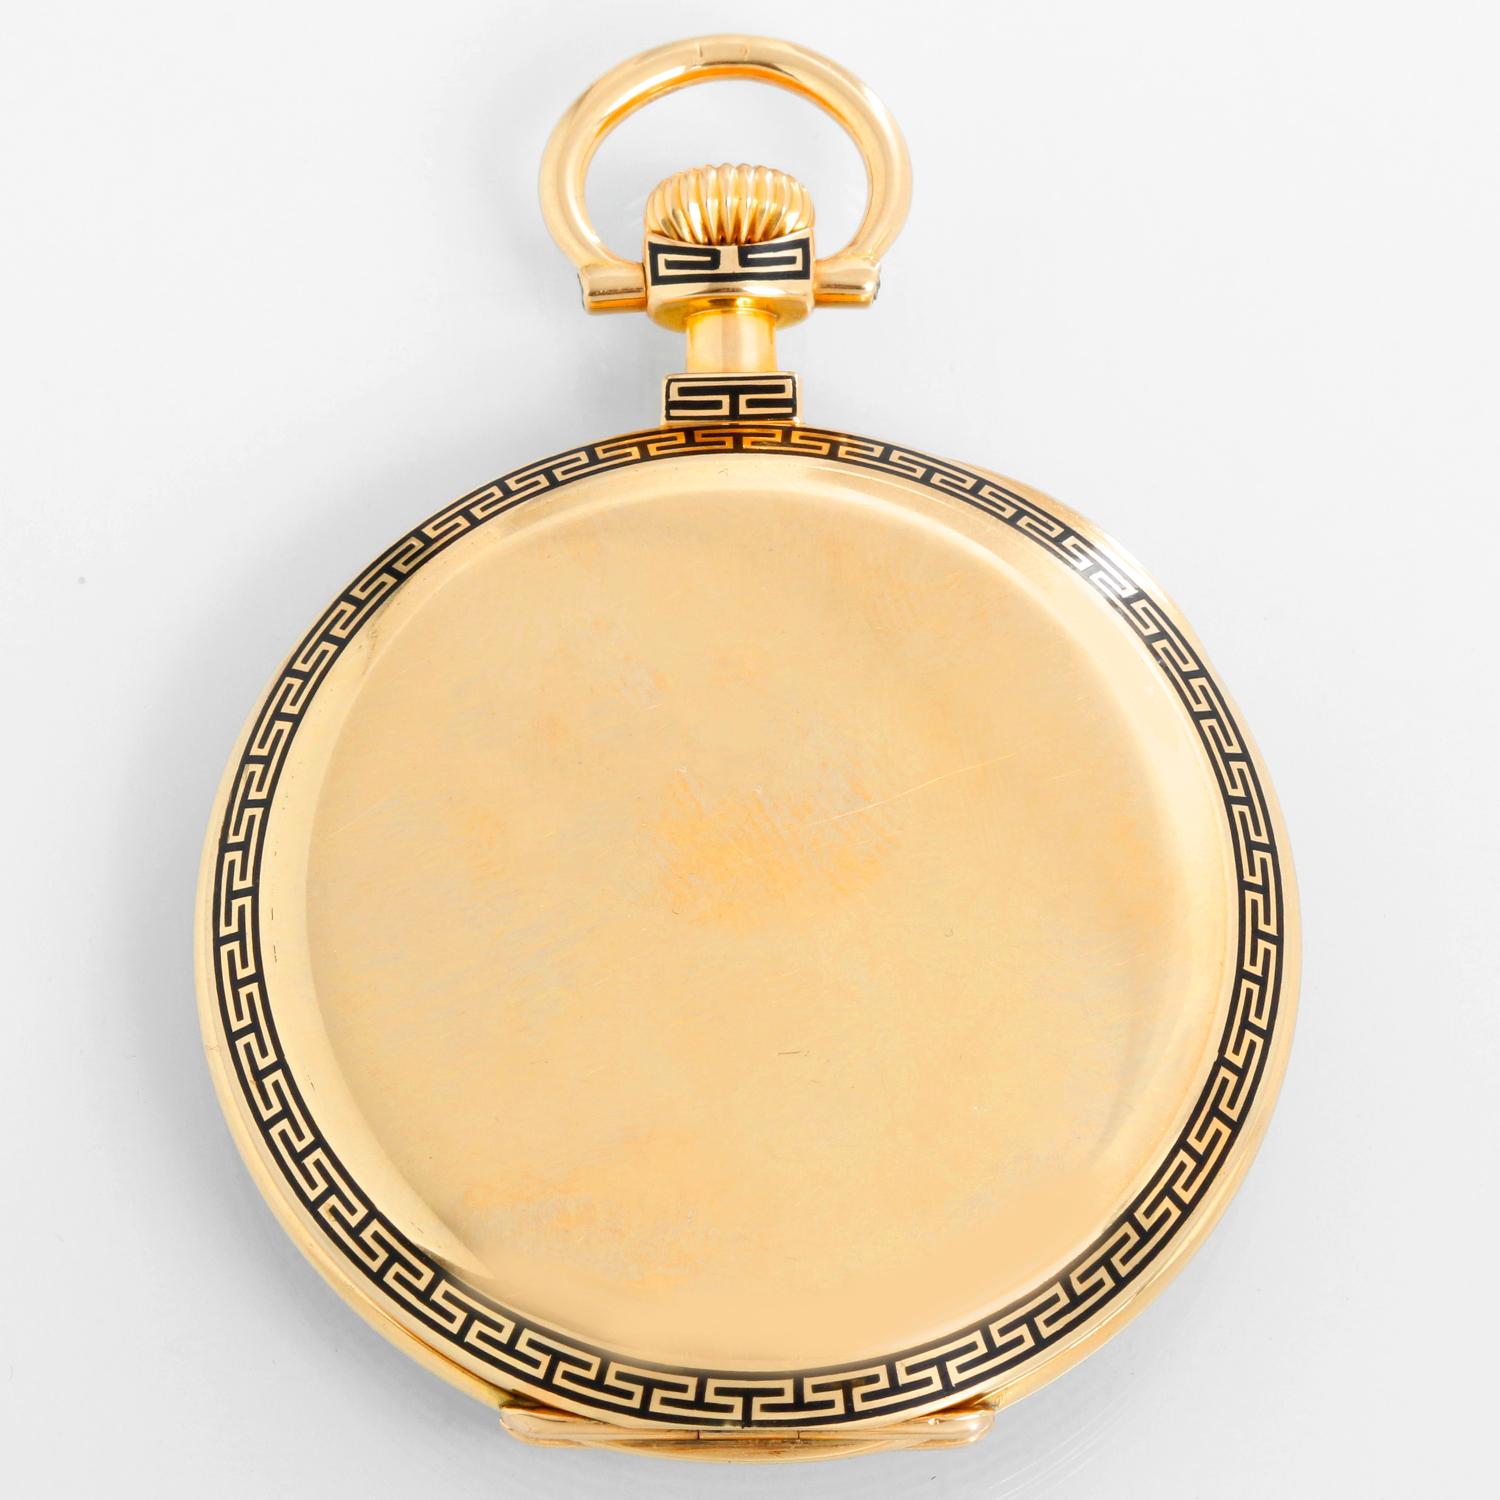 Patek Philippe Open Face 18K Yellow Gold Pocket Watch - Manual winding. 18K Yellow Gold ( 48 mm ) with Greek key black enameling to bezel rear perimeter and pendant, initials to rear, gold cuvette with signature ring. Cream colored enamel stainless